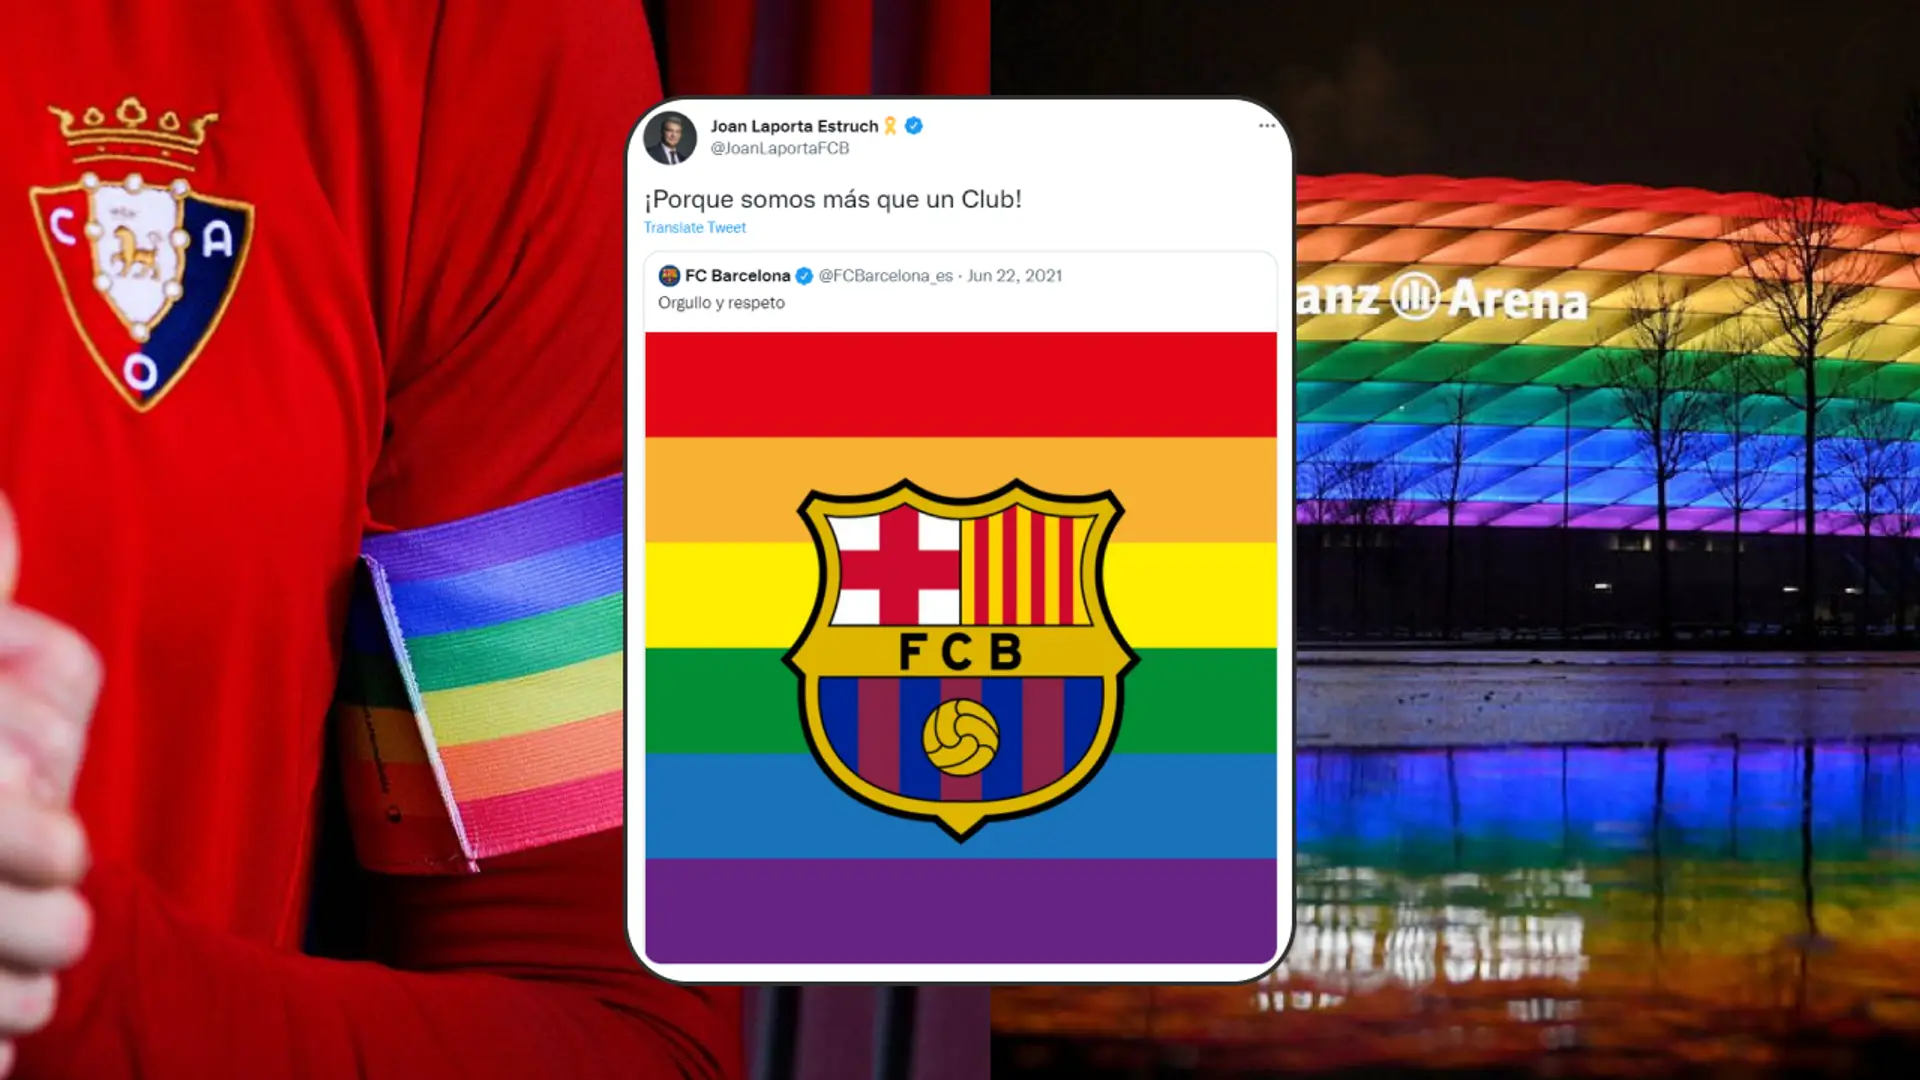 How would you react if Barca player came out as gay?